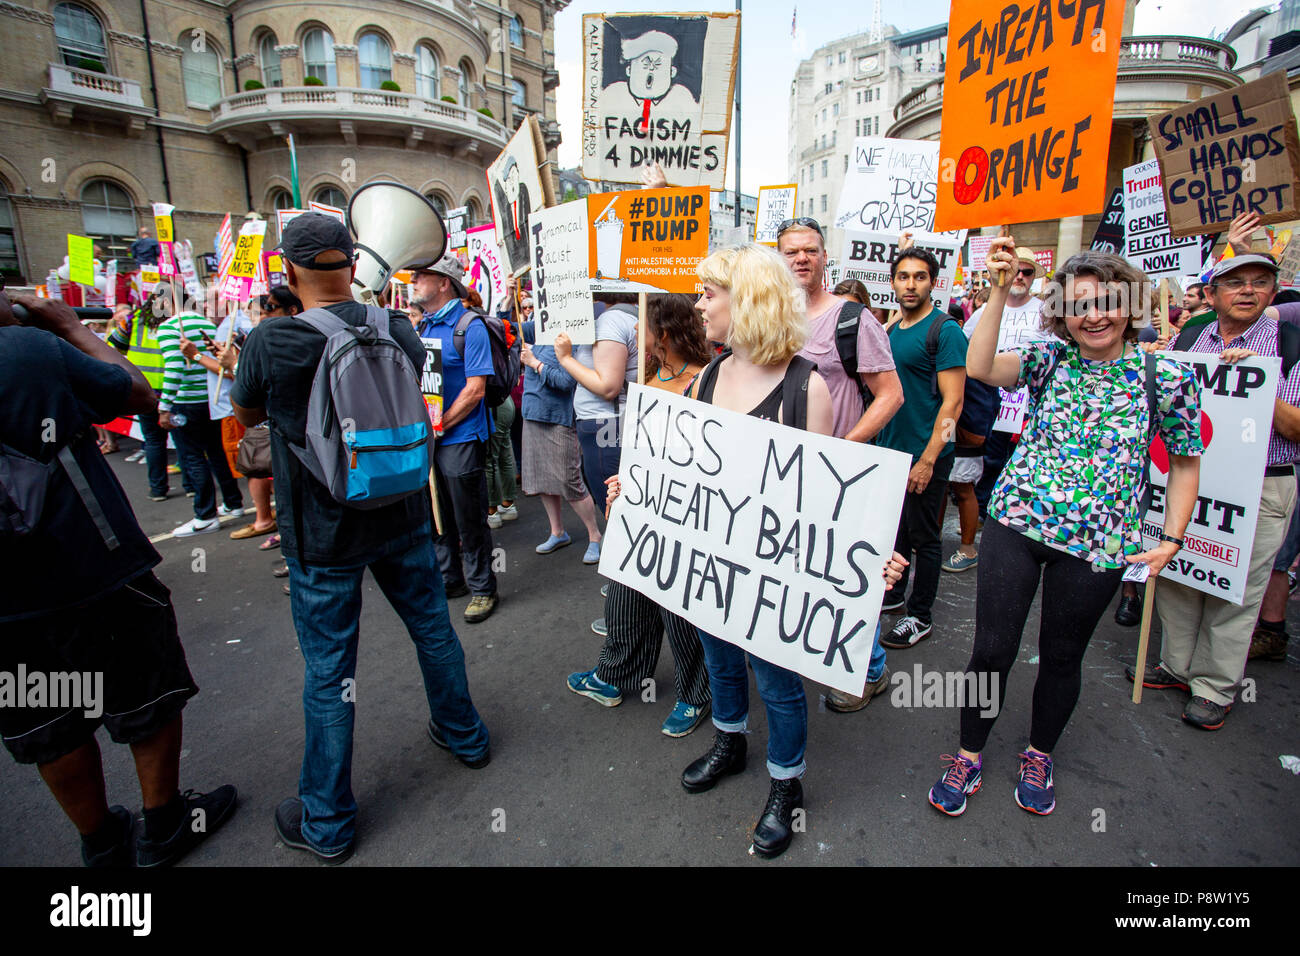 London/United Kingdom - July 13, 2018: Protests against Donald Trump continue with a march in central London ending up in Trafalgar Square for a rally. Some signs were less than complimentary. Credit: Martin Leitch/Alamy Live News Stock Photo